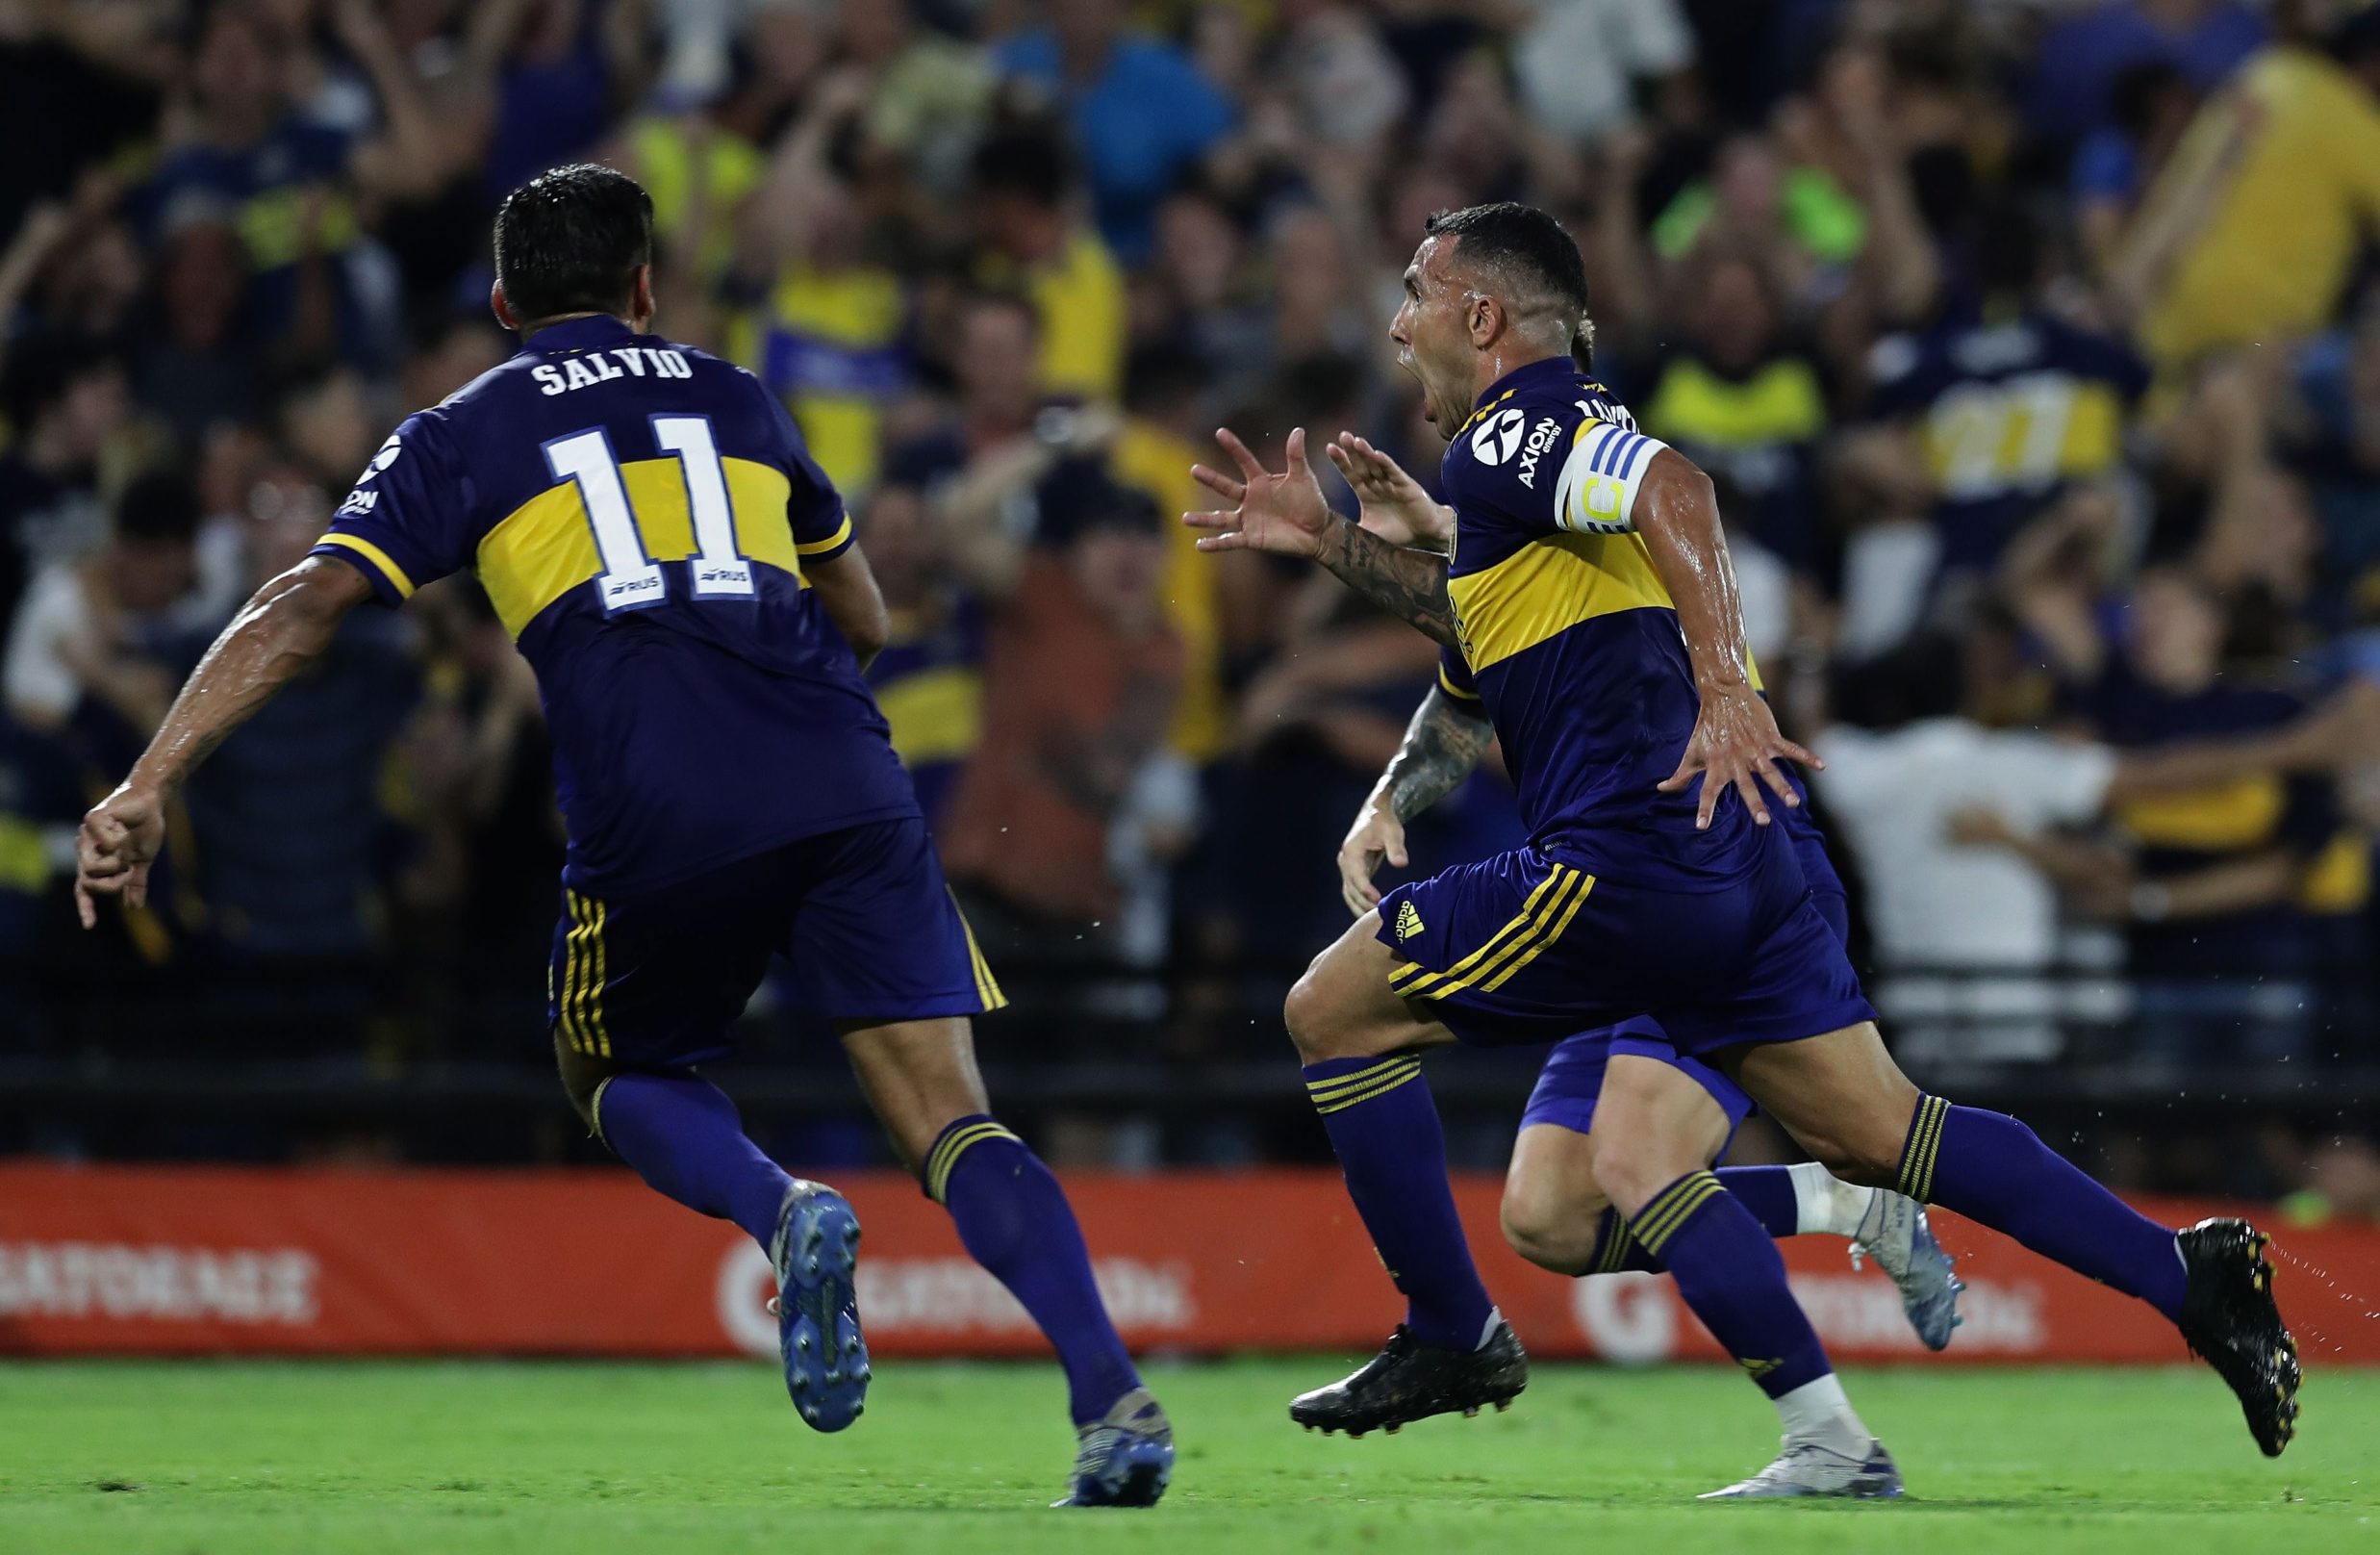 Boca Juniors' forward Carlos Tevez (R) celebrates after scoring a goal against Gimnasia y Esgrima during their Argentina First Division 2020 Superliga Tournament football match at La Bombonera stadium, in Buenos Aires, on March 7, 2020. (Photo by ALEJANDRO PAGNI / AFP)